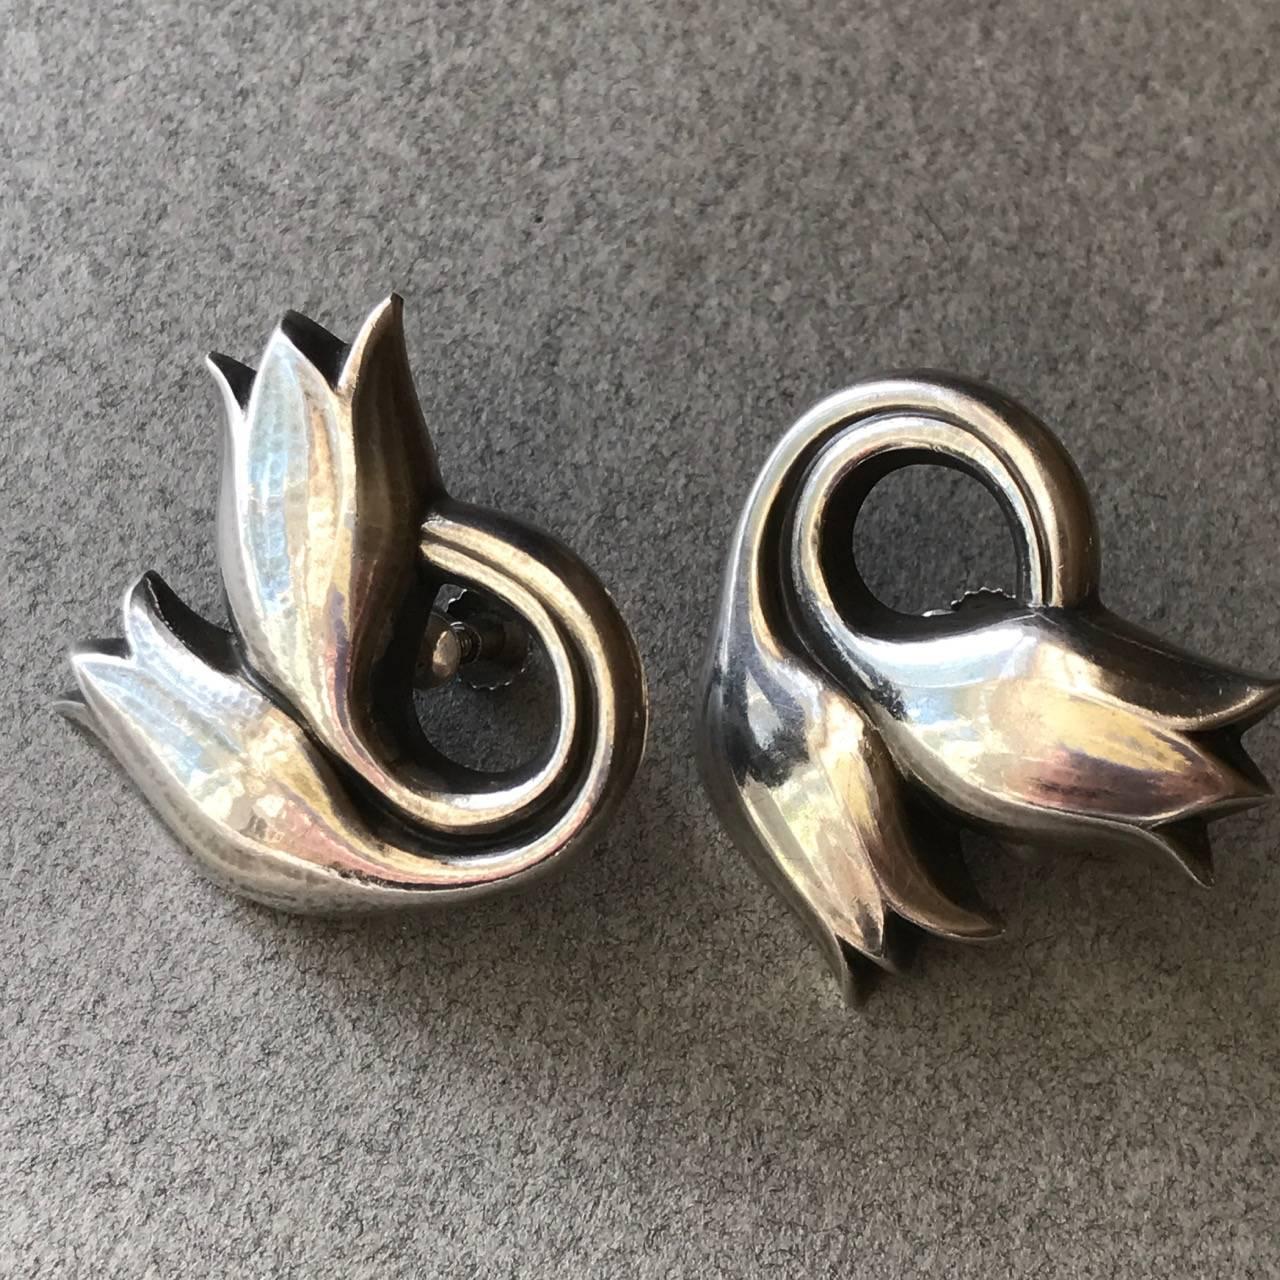 Georg Jensen Tulip Earrings Large size no 100B

Screw backs. Excellent condition with visible hand hammering.

Matching bracelet available.

A similar example can be seen in the book,